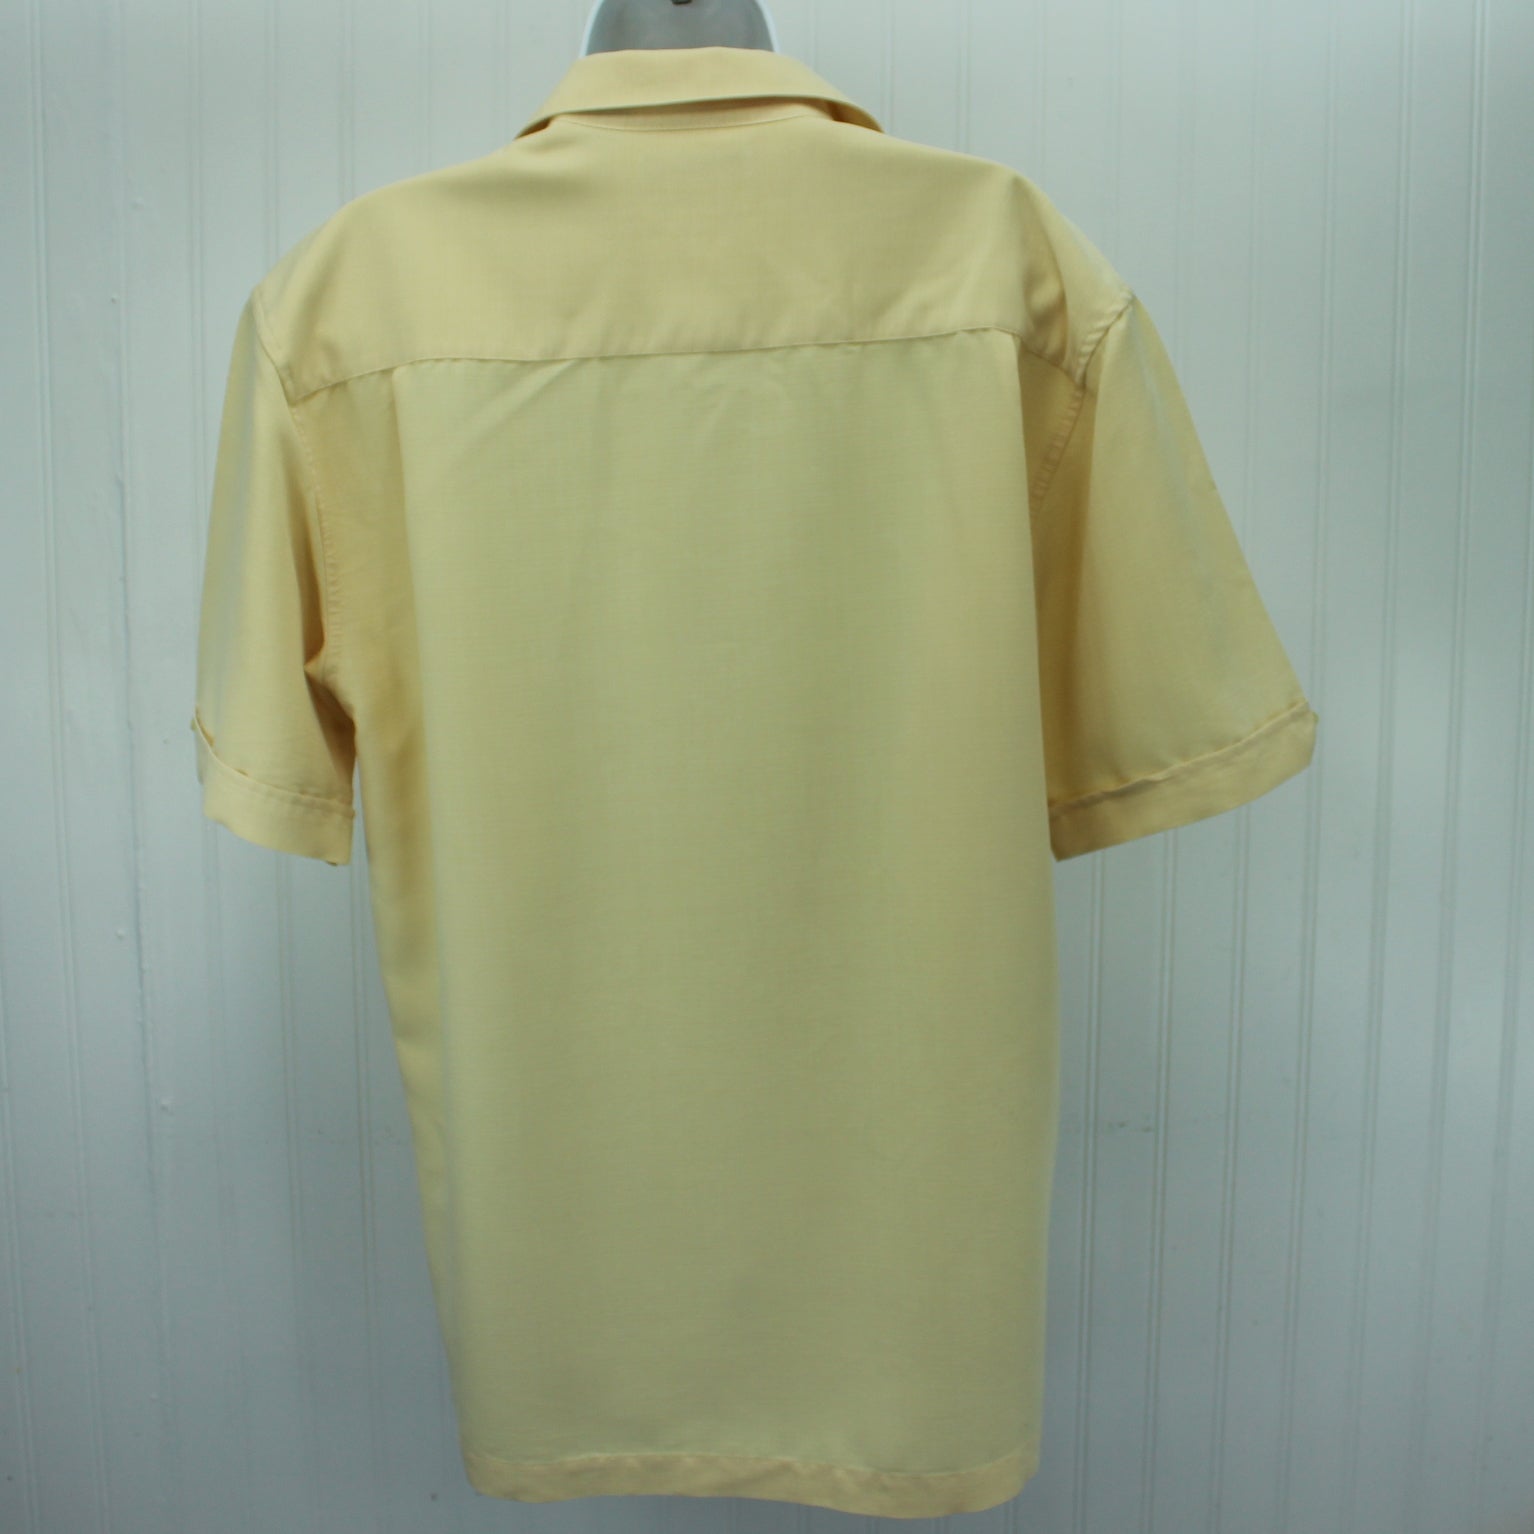 Cubavera Shirt Cream Color Tucked Blue Stitched Front M/M Chest 45" back version view